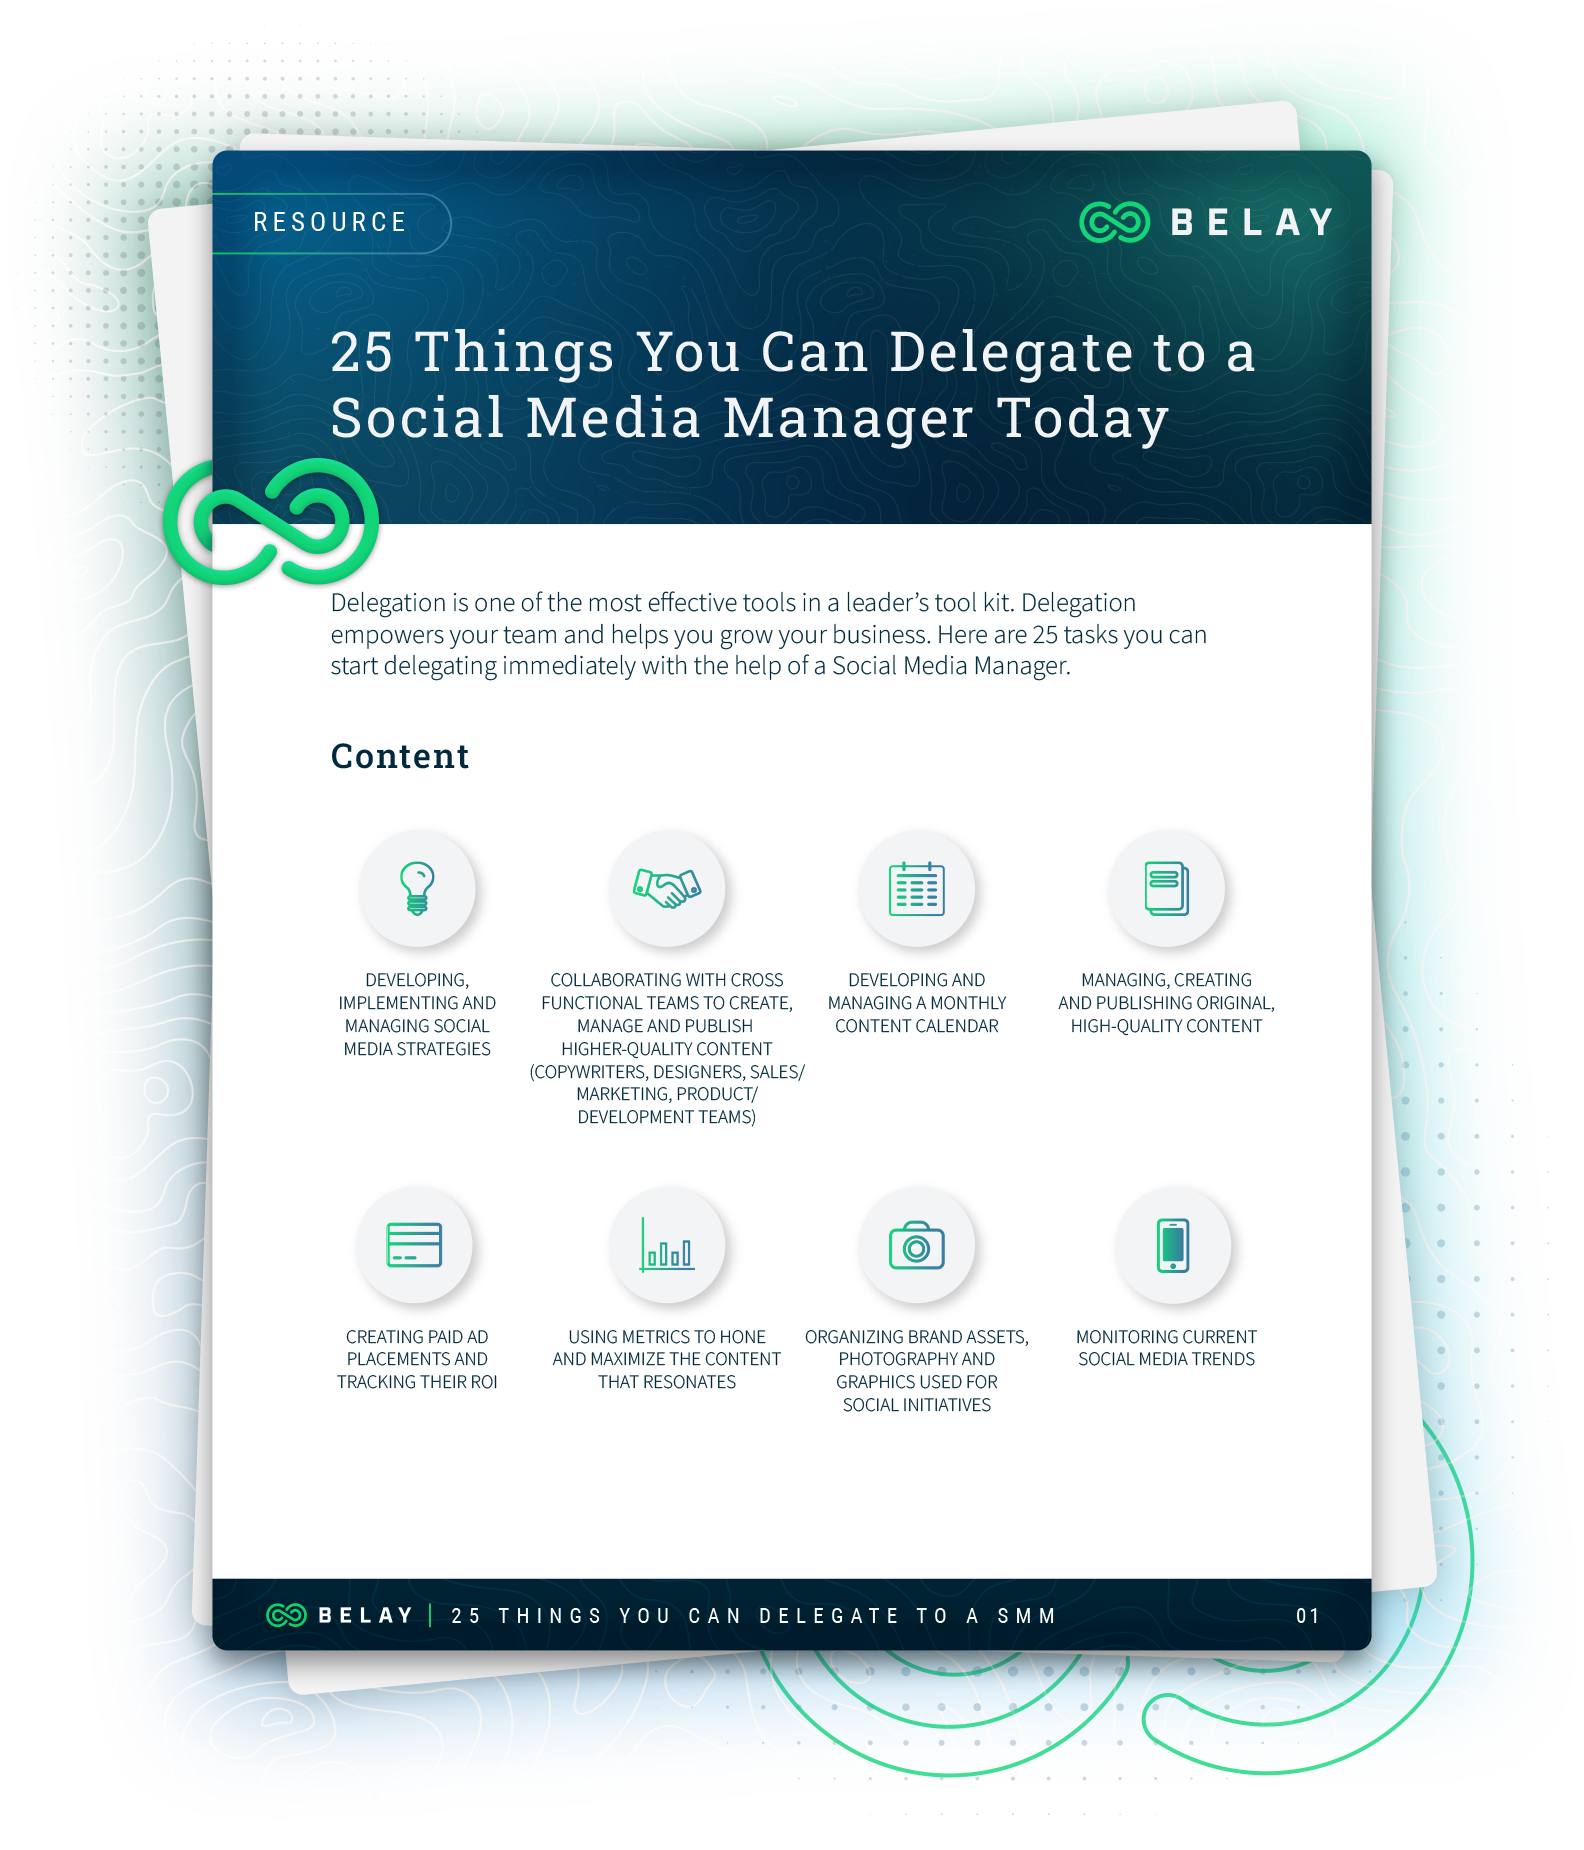 25 Things You Can Delegate to a Social Media Manager Today